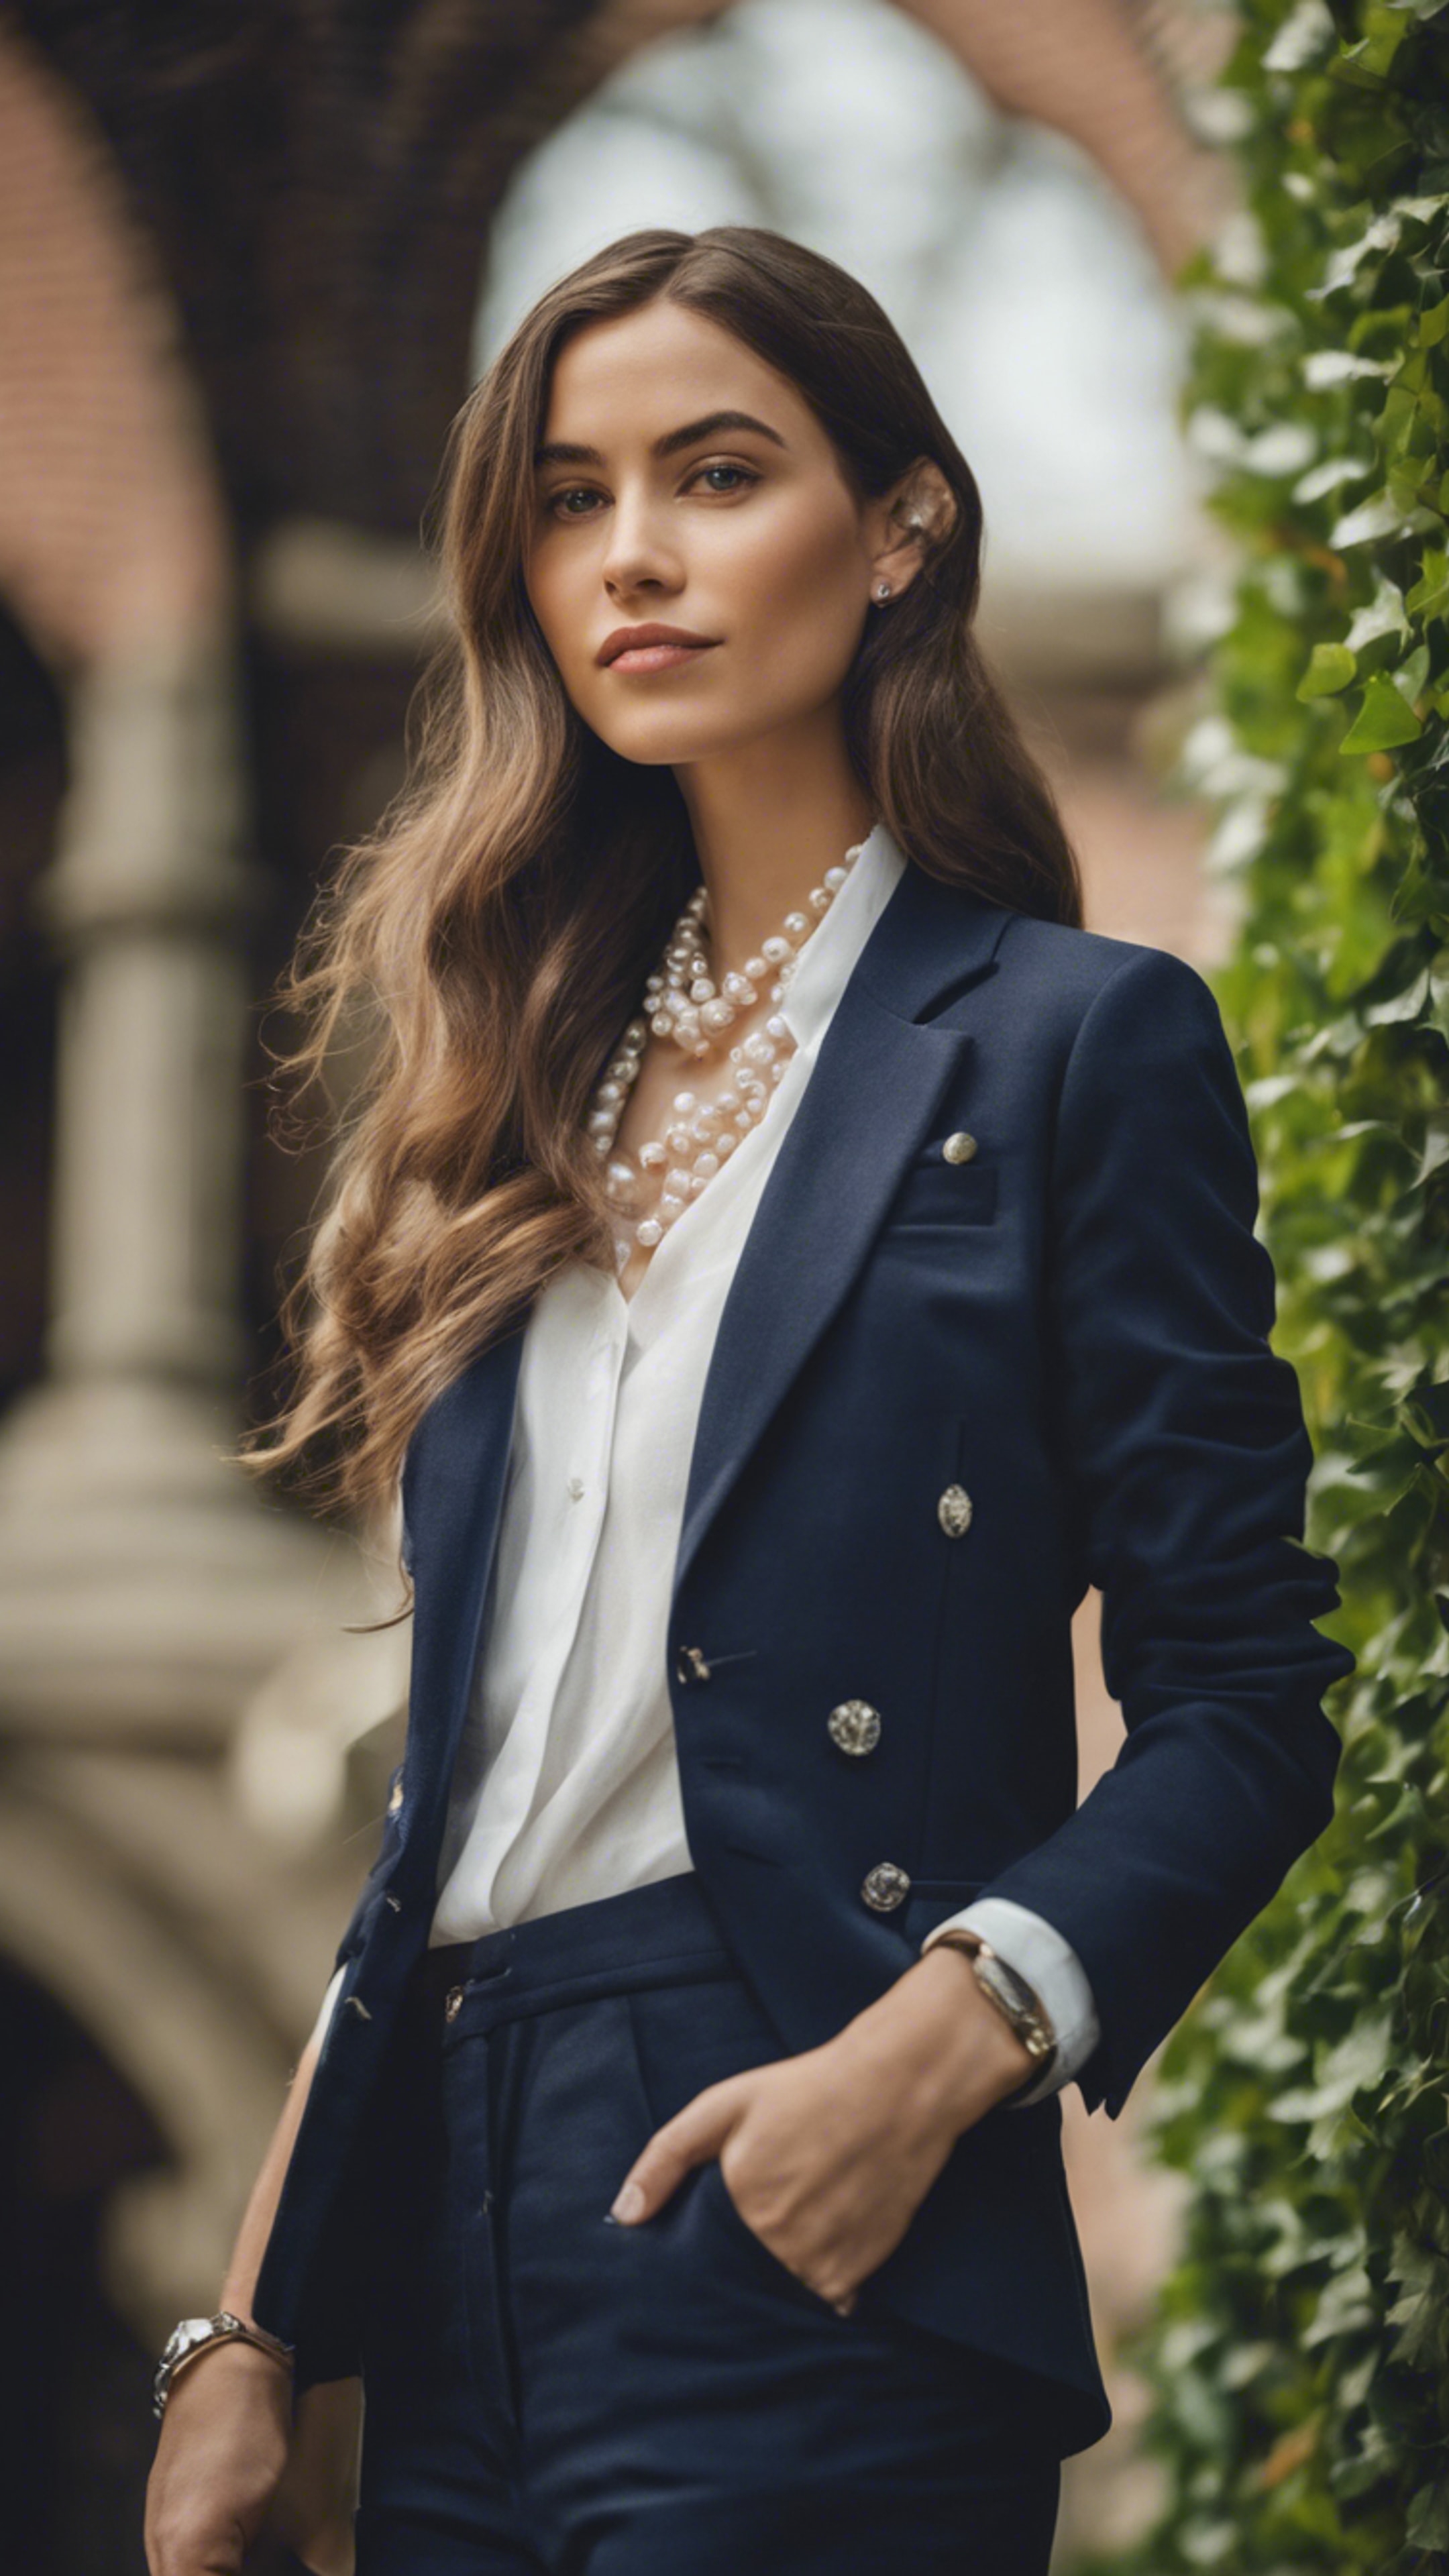 A portrait of a preppy woman in a navy blue blazer, pearl necklace, and a white linen shirt, posing in an Ivy League campus. Wallpaper[1775f808339c45cb81cf]